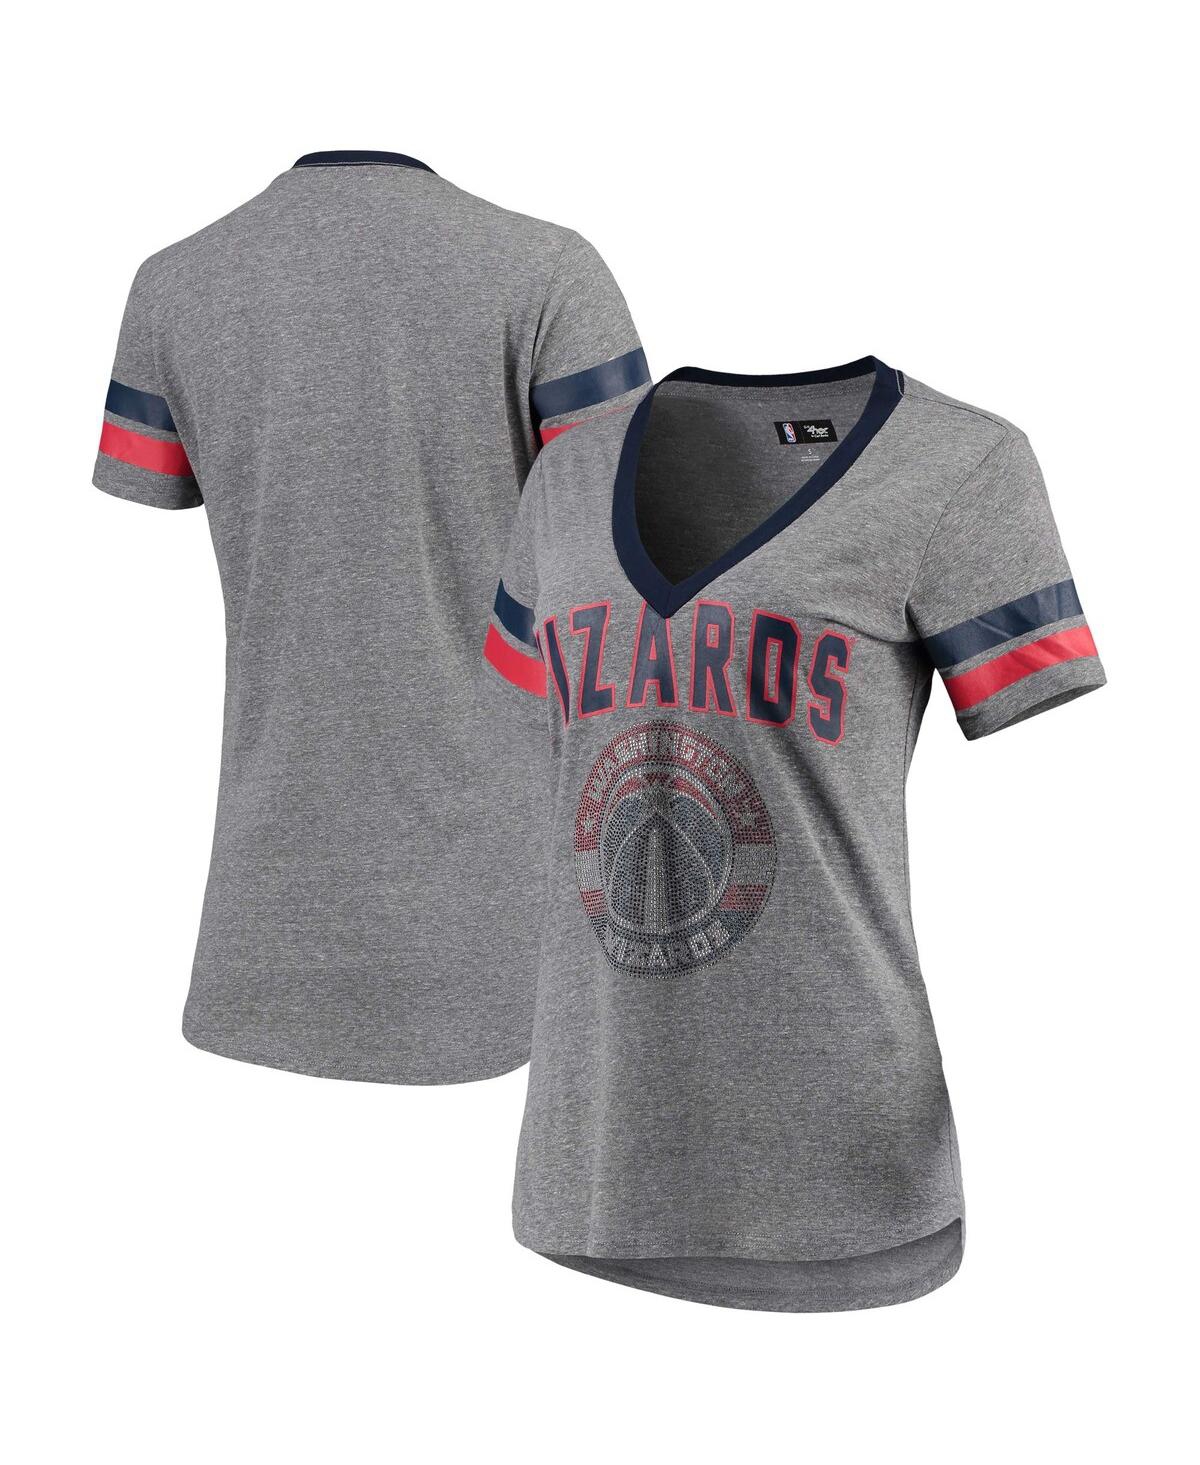 Women's G-iii 4Her by Carl Banks Gray and Red Washington Wizards Walk Off Crystal Applique Logo V-Neck T-shirt - Gray, Red